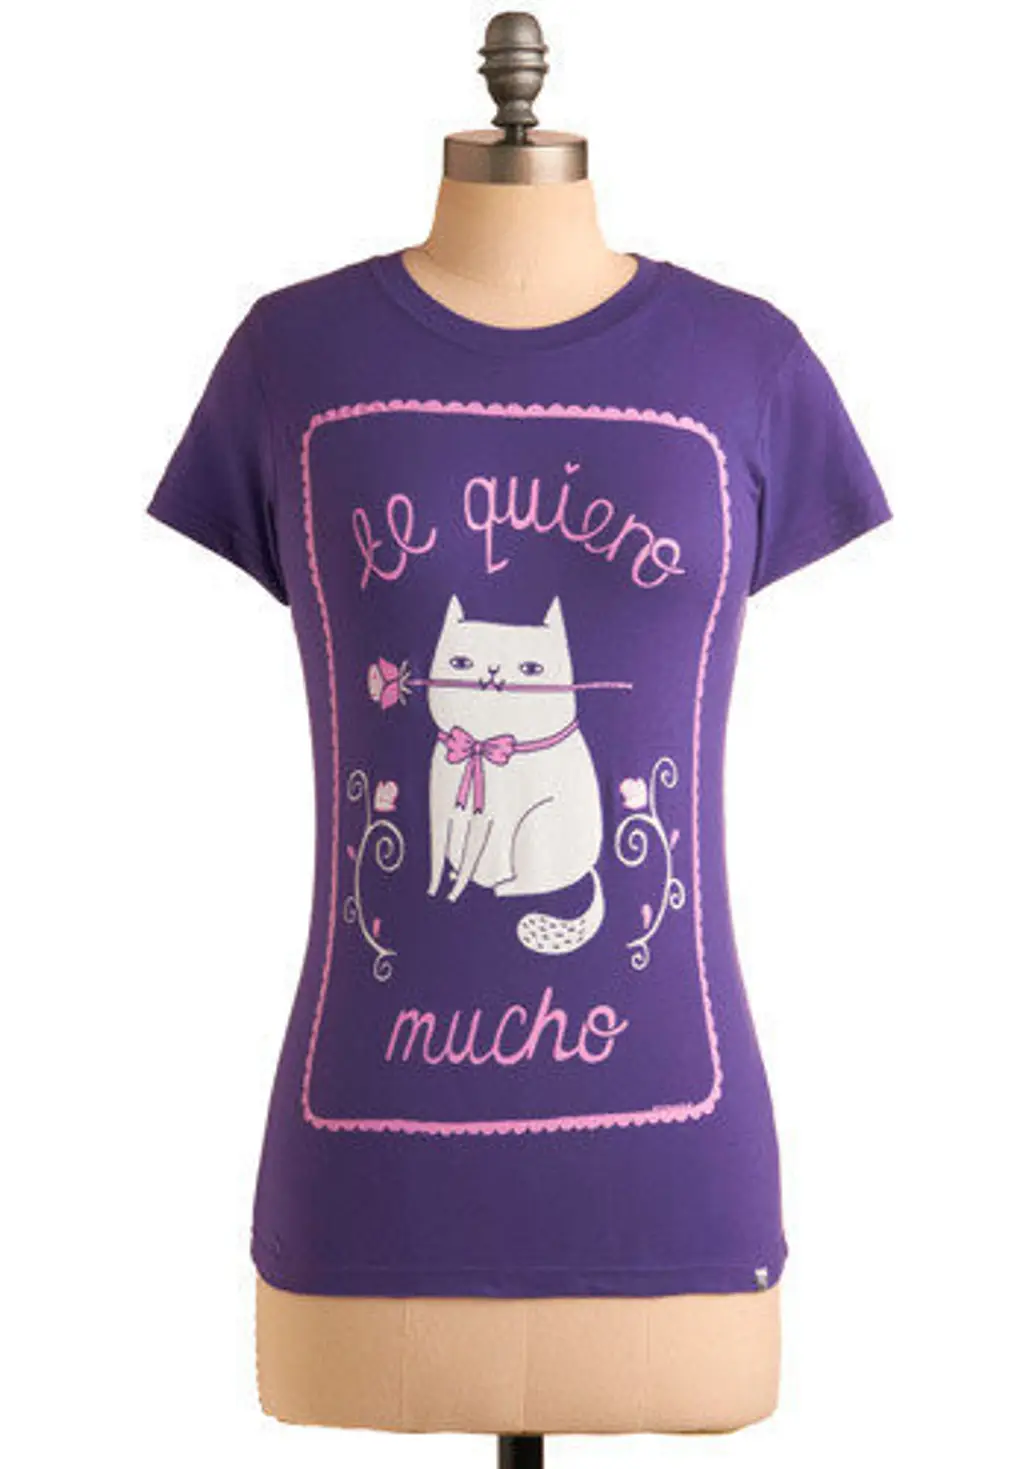 This Meow's Forever Tee